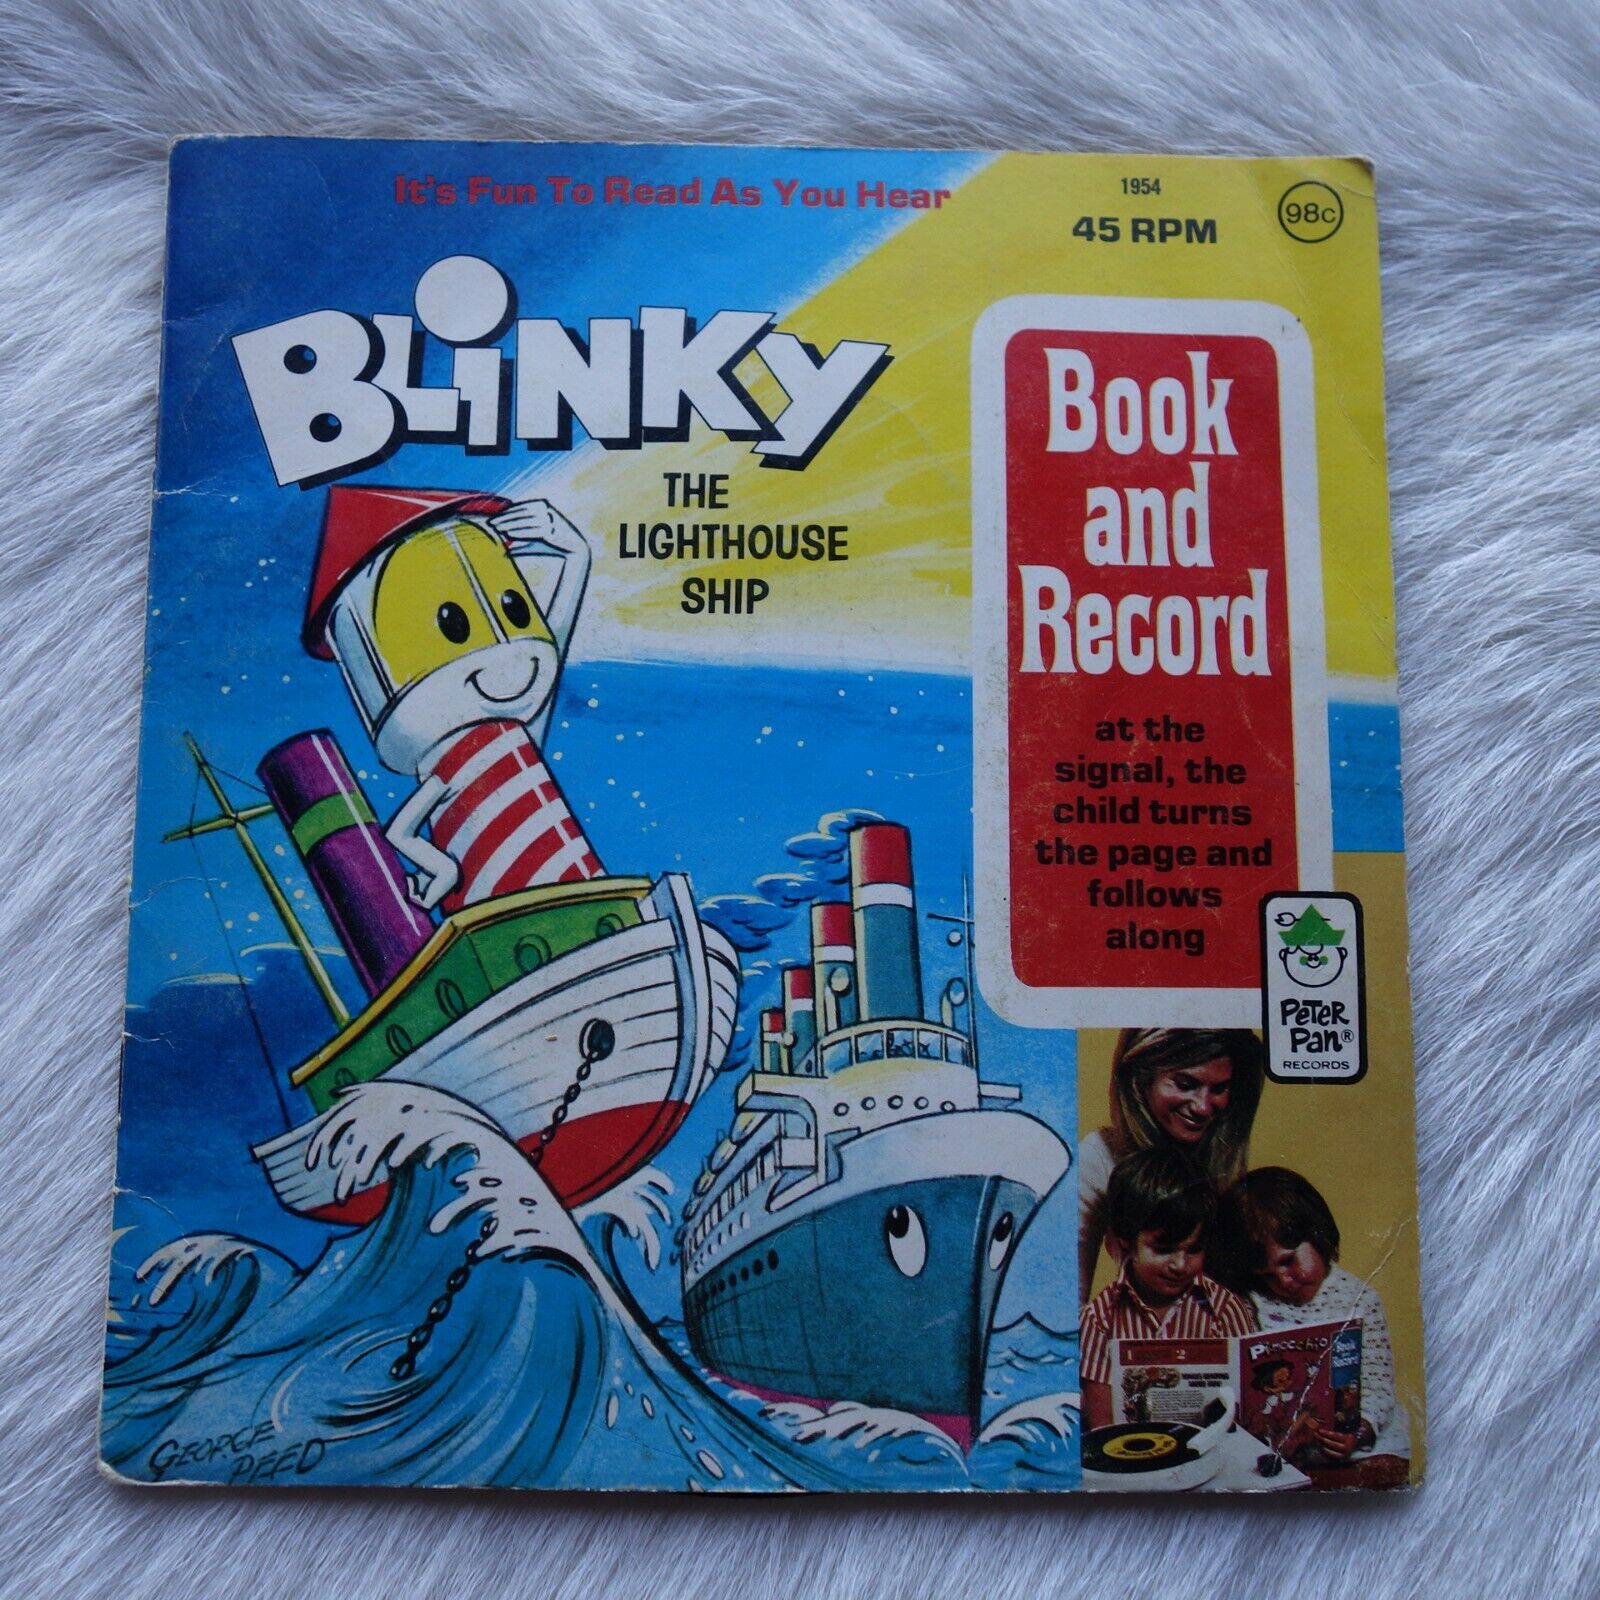 Vintage BLINKY THE LIGHTHOUSE SHIP Book and Record Read Along Childrens Record